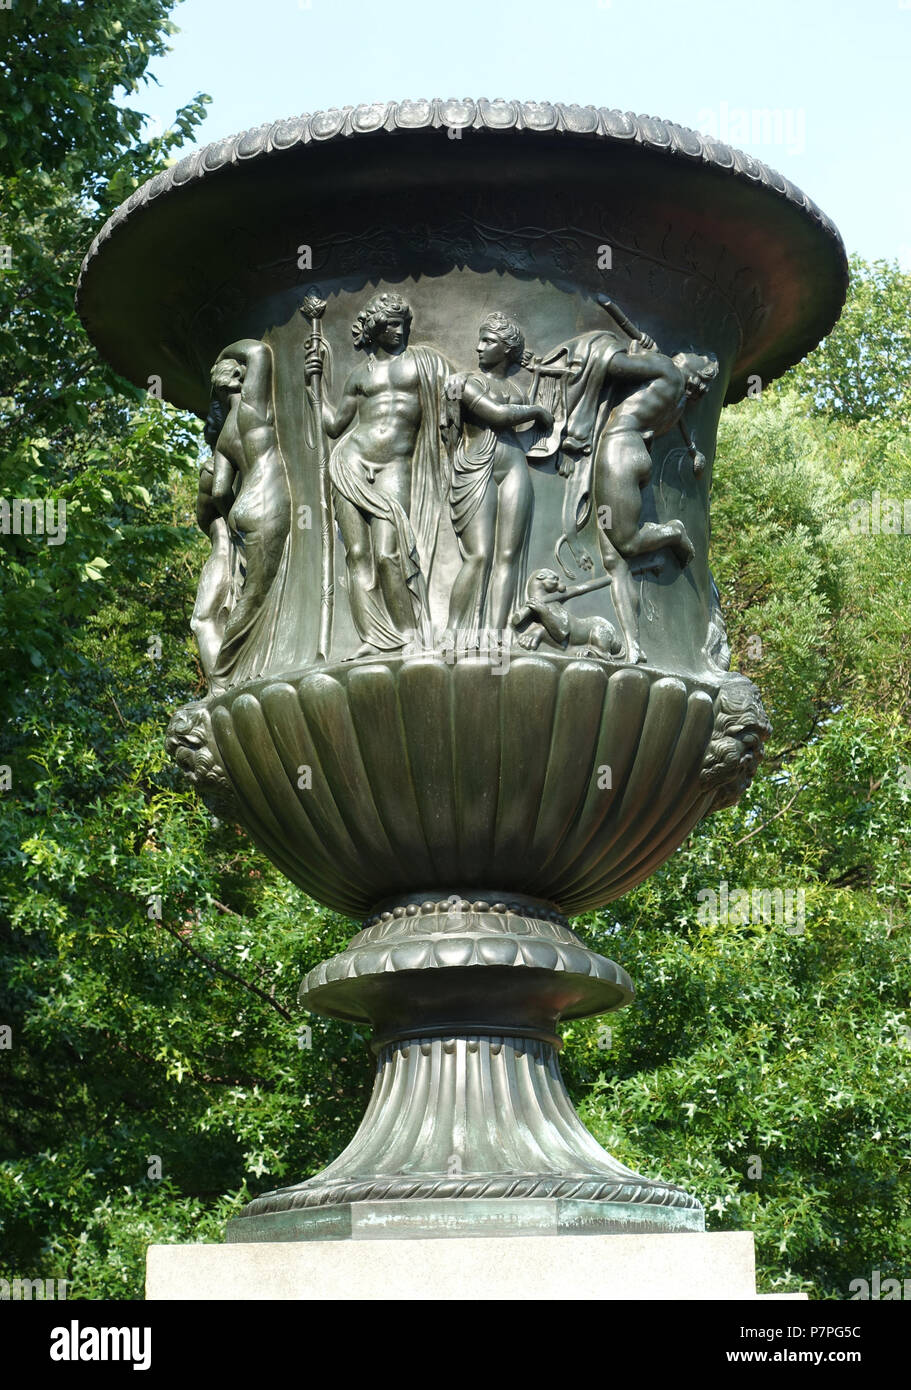 English: Navy Yard Urn (Lafayette Square) - Washington, DC. This artwork is in the  because the artist died more than 70 years ago. 11 June 2015, 17:23:40 284 Navy Yard Urn (Lafayette Square) - Washington, DC - DSC05641 Stock Photo